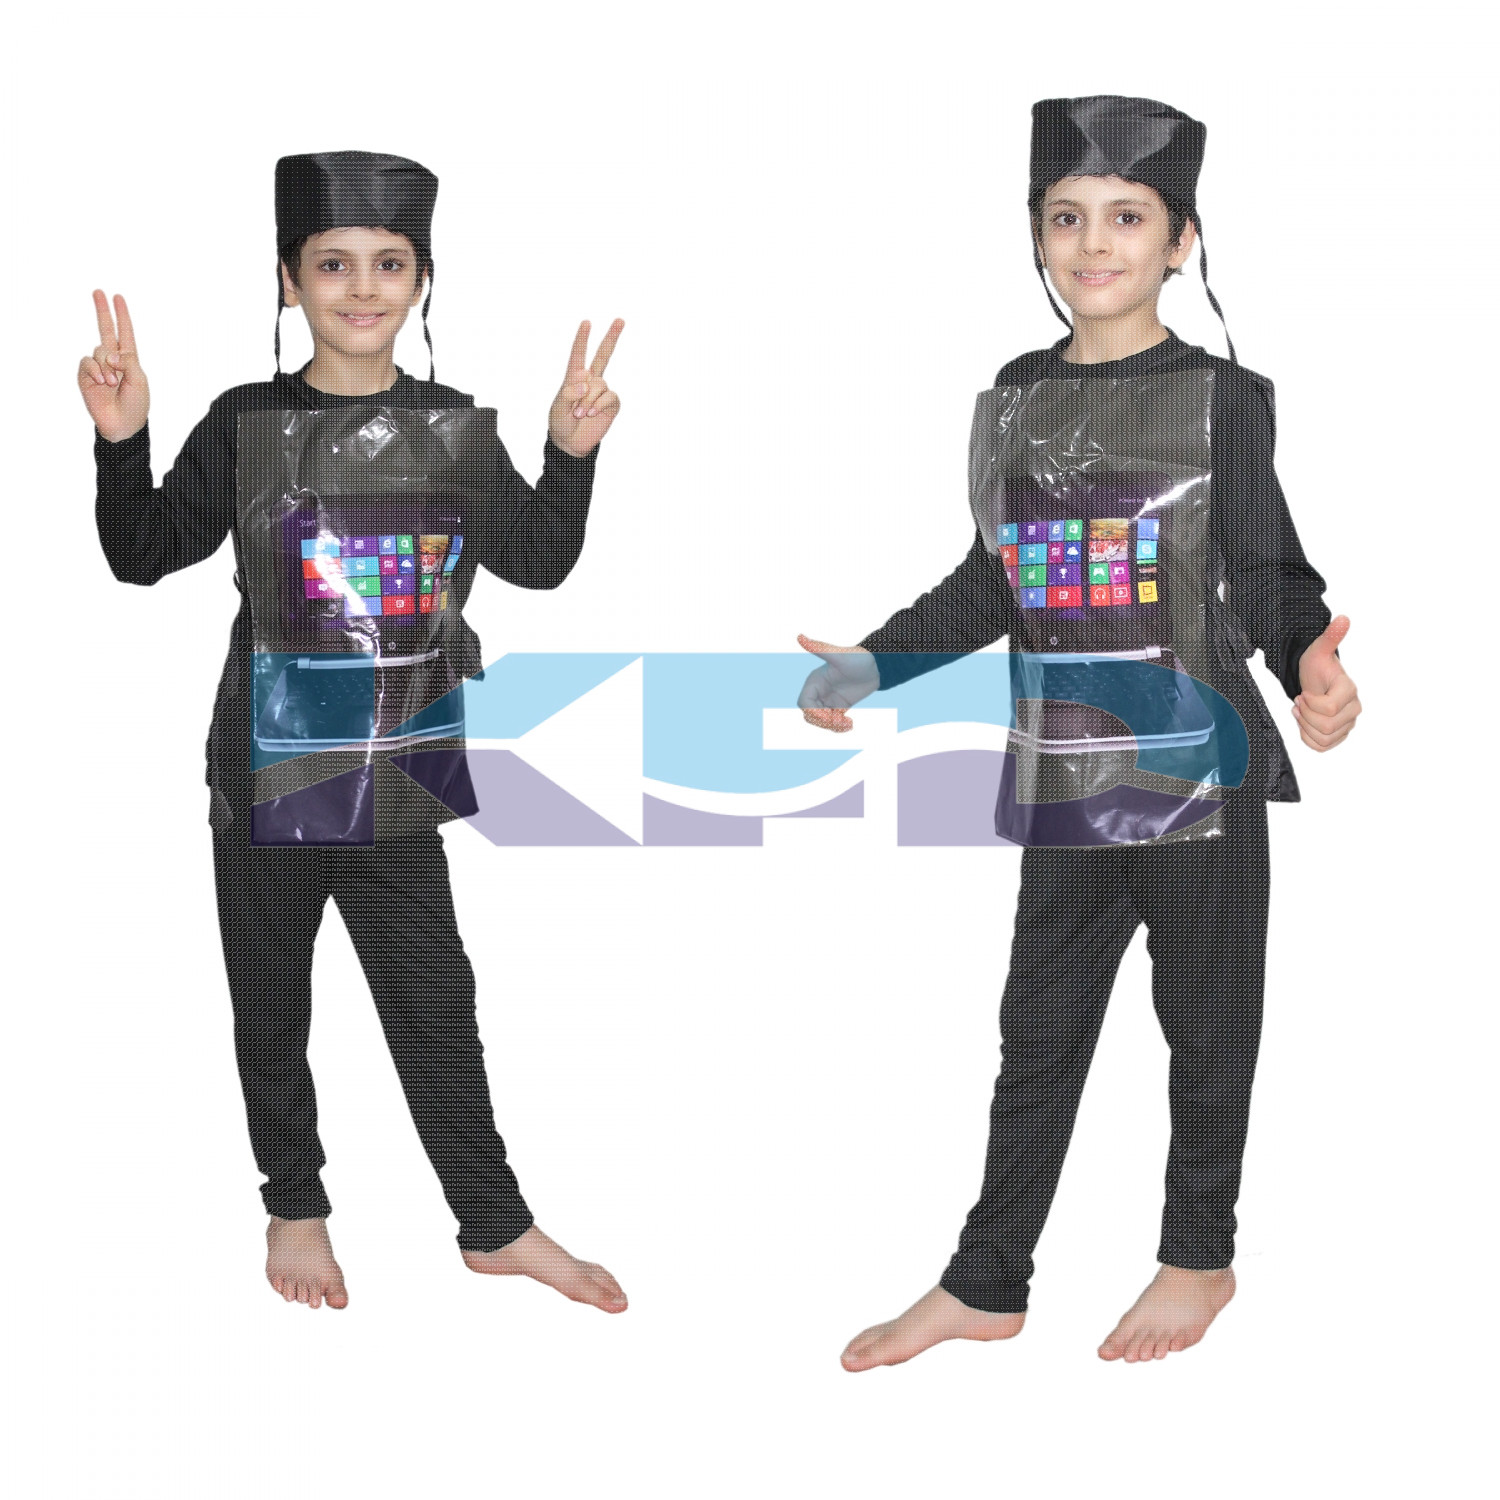 Laptop fancy dress for kids,Object Costume for School Annual function/Theme Party/Competition/Stage Shows Dress